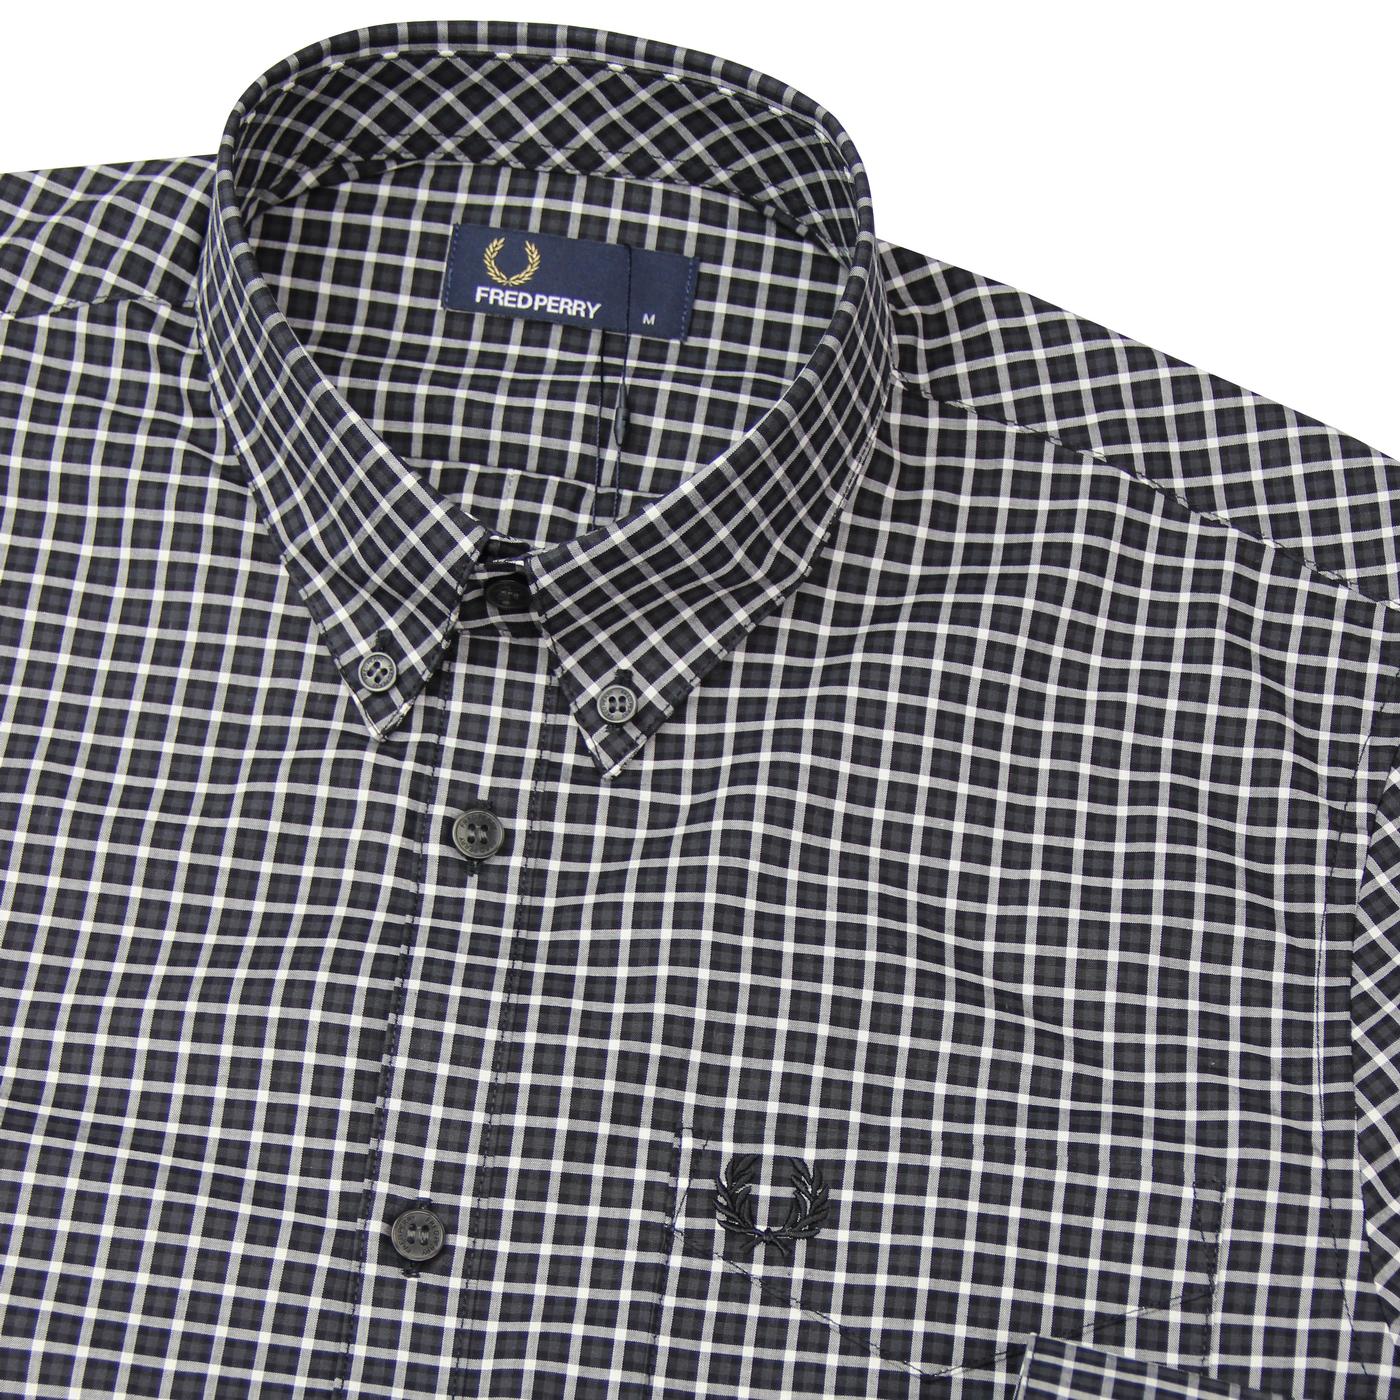 FRED PERRY Mens Mod 3 Colour Gingham Shirt in Black